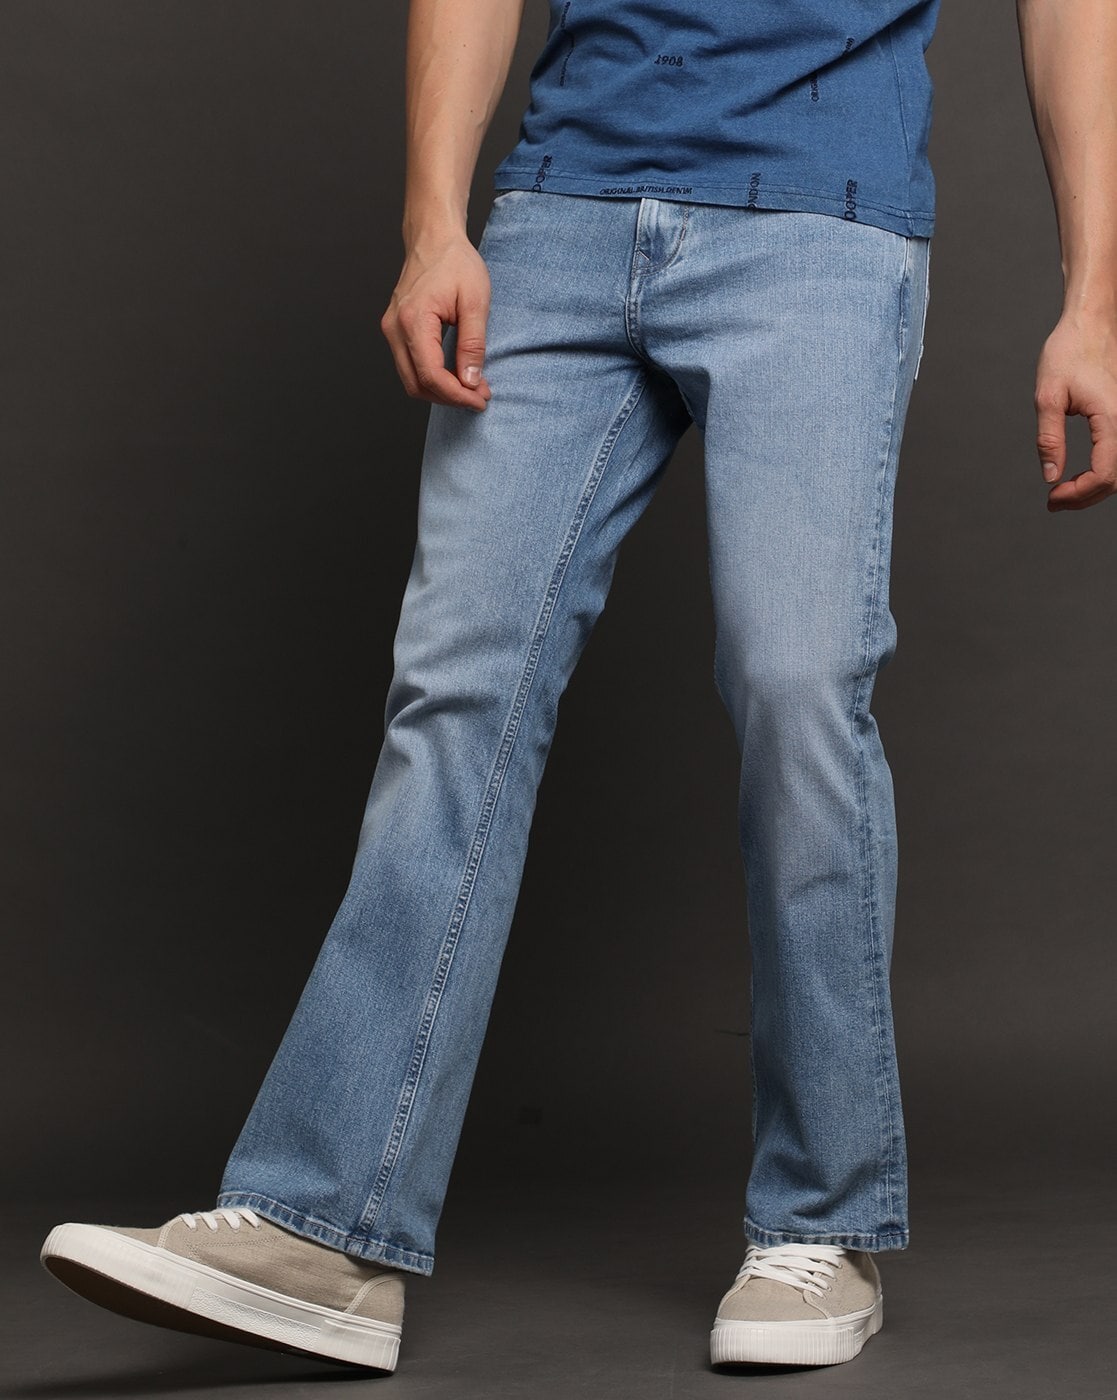 Buy U.S. Polo Assn. Denim Co. Whiskered Connor Bootcut Jeans - NNNOW.com